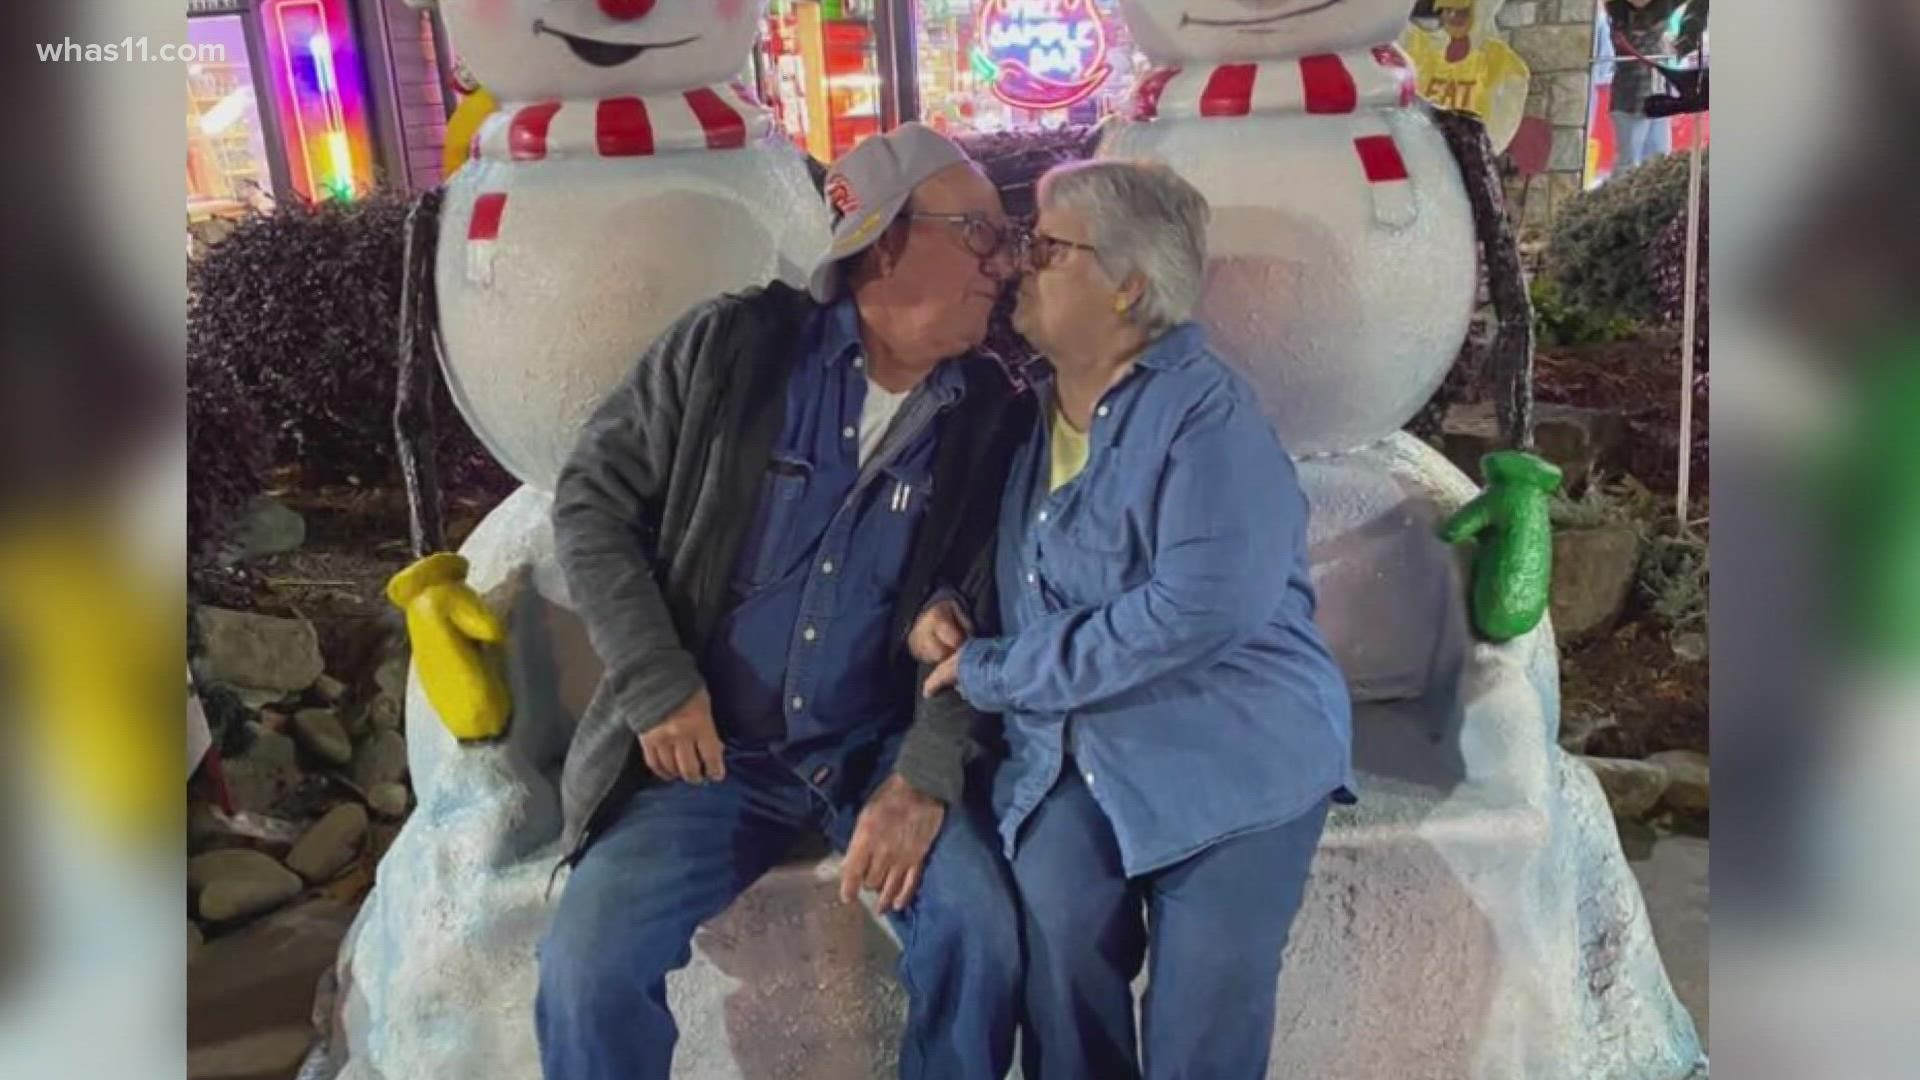 The bodies of Billy and Judy Miller were found holding onto each other in the rubble of their home in Muhlenberg County, according to their granddaughter.